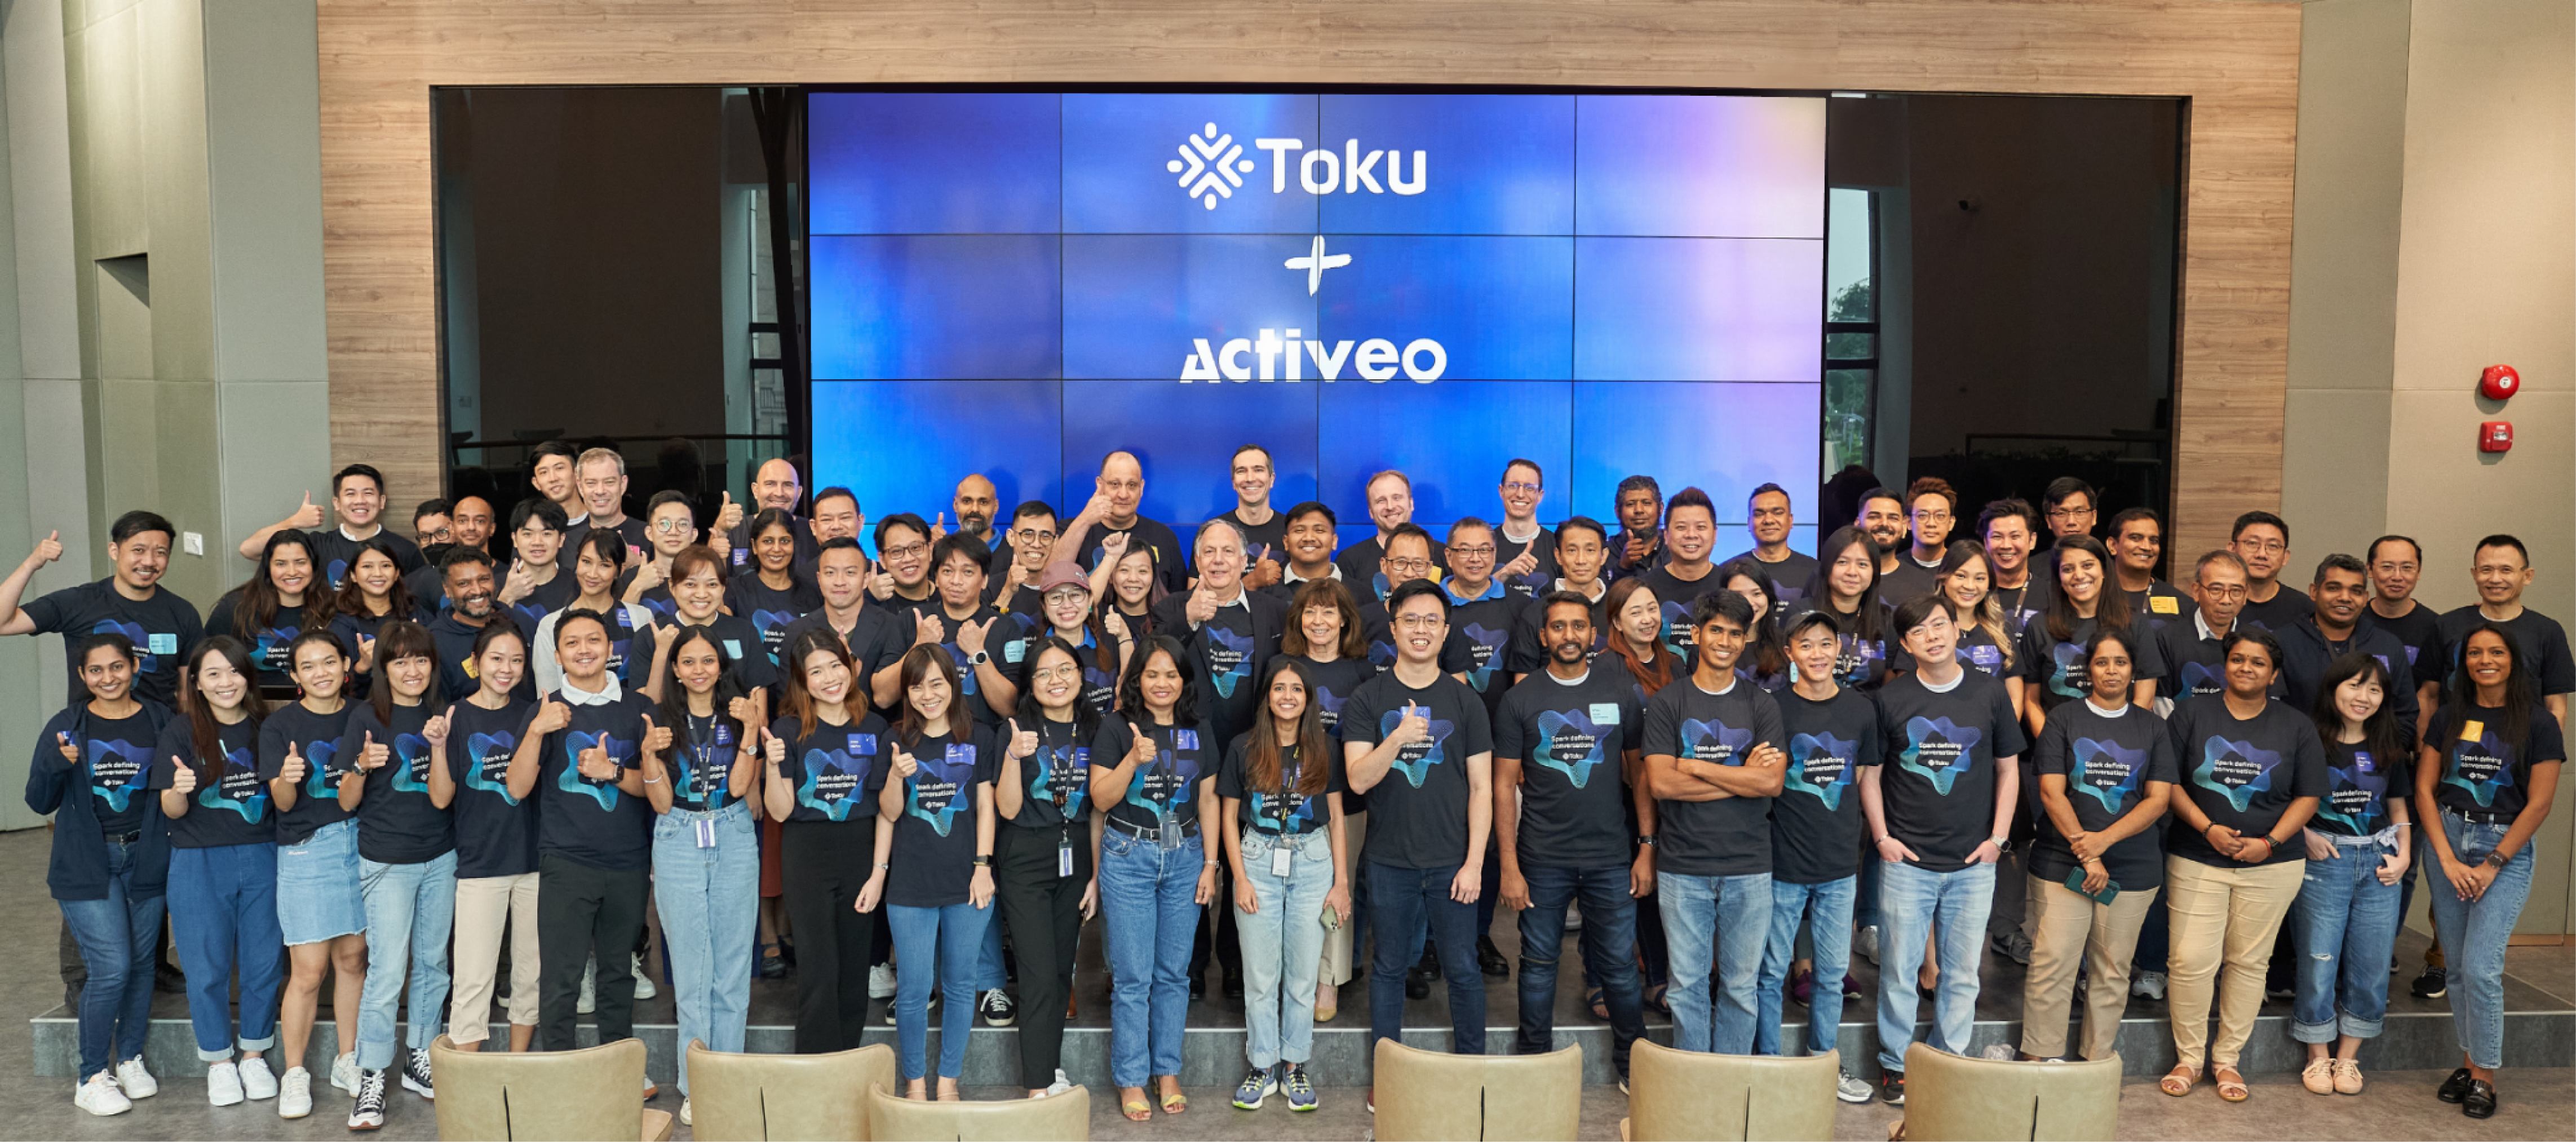 press release toku acquires activeo singapore all team together